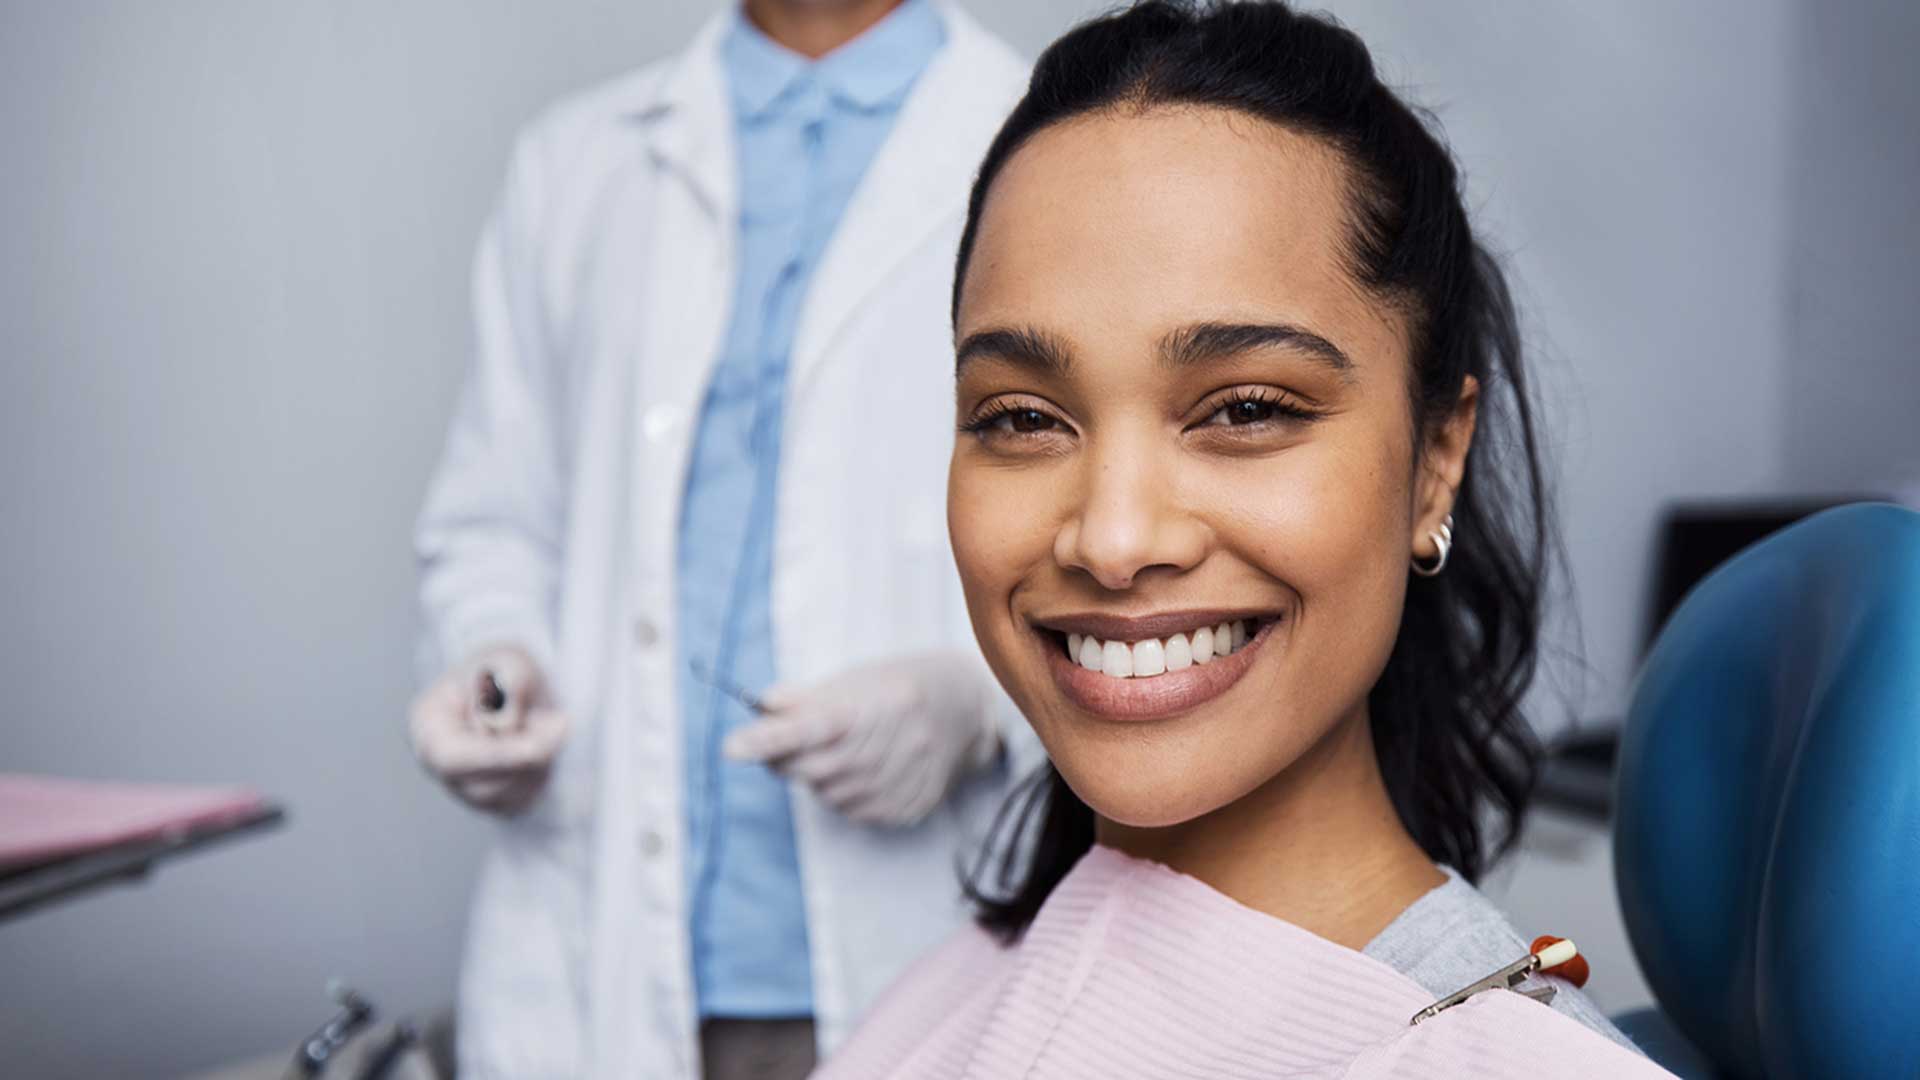 The Value Of Dental Benefits